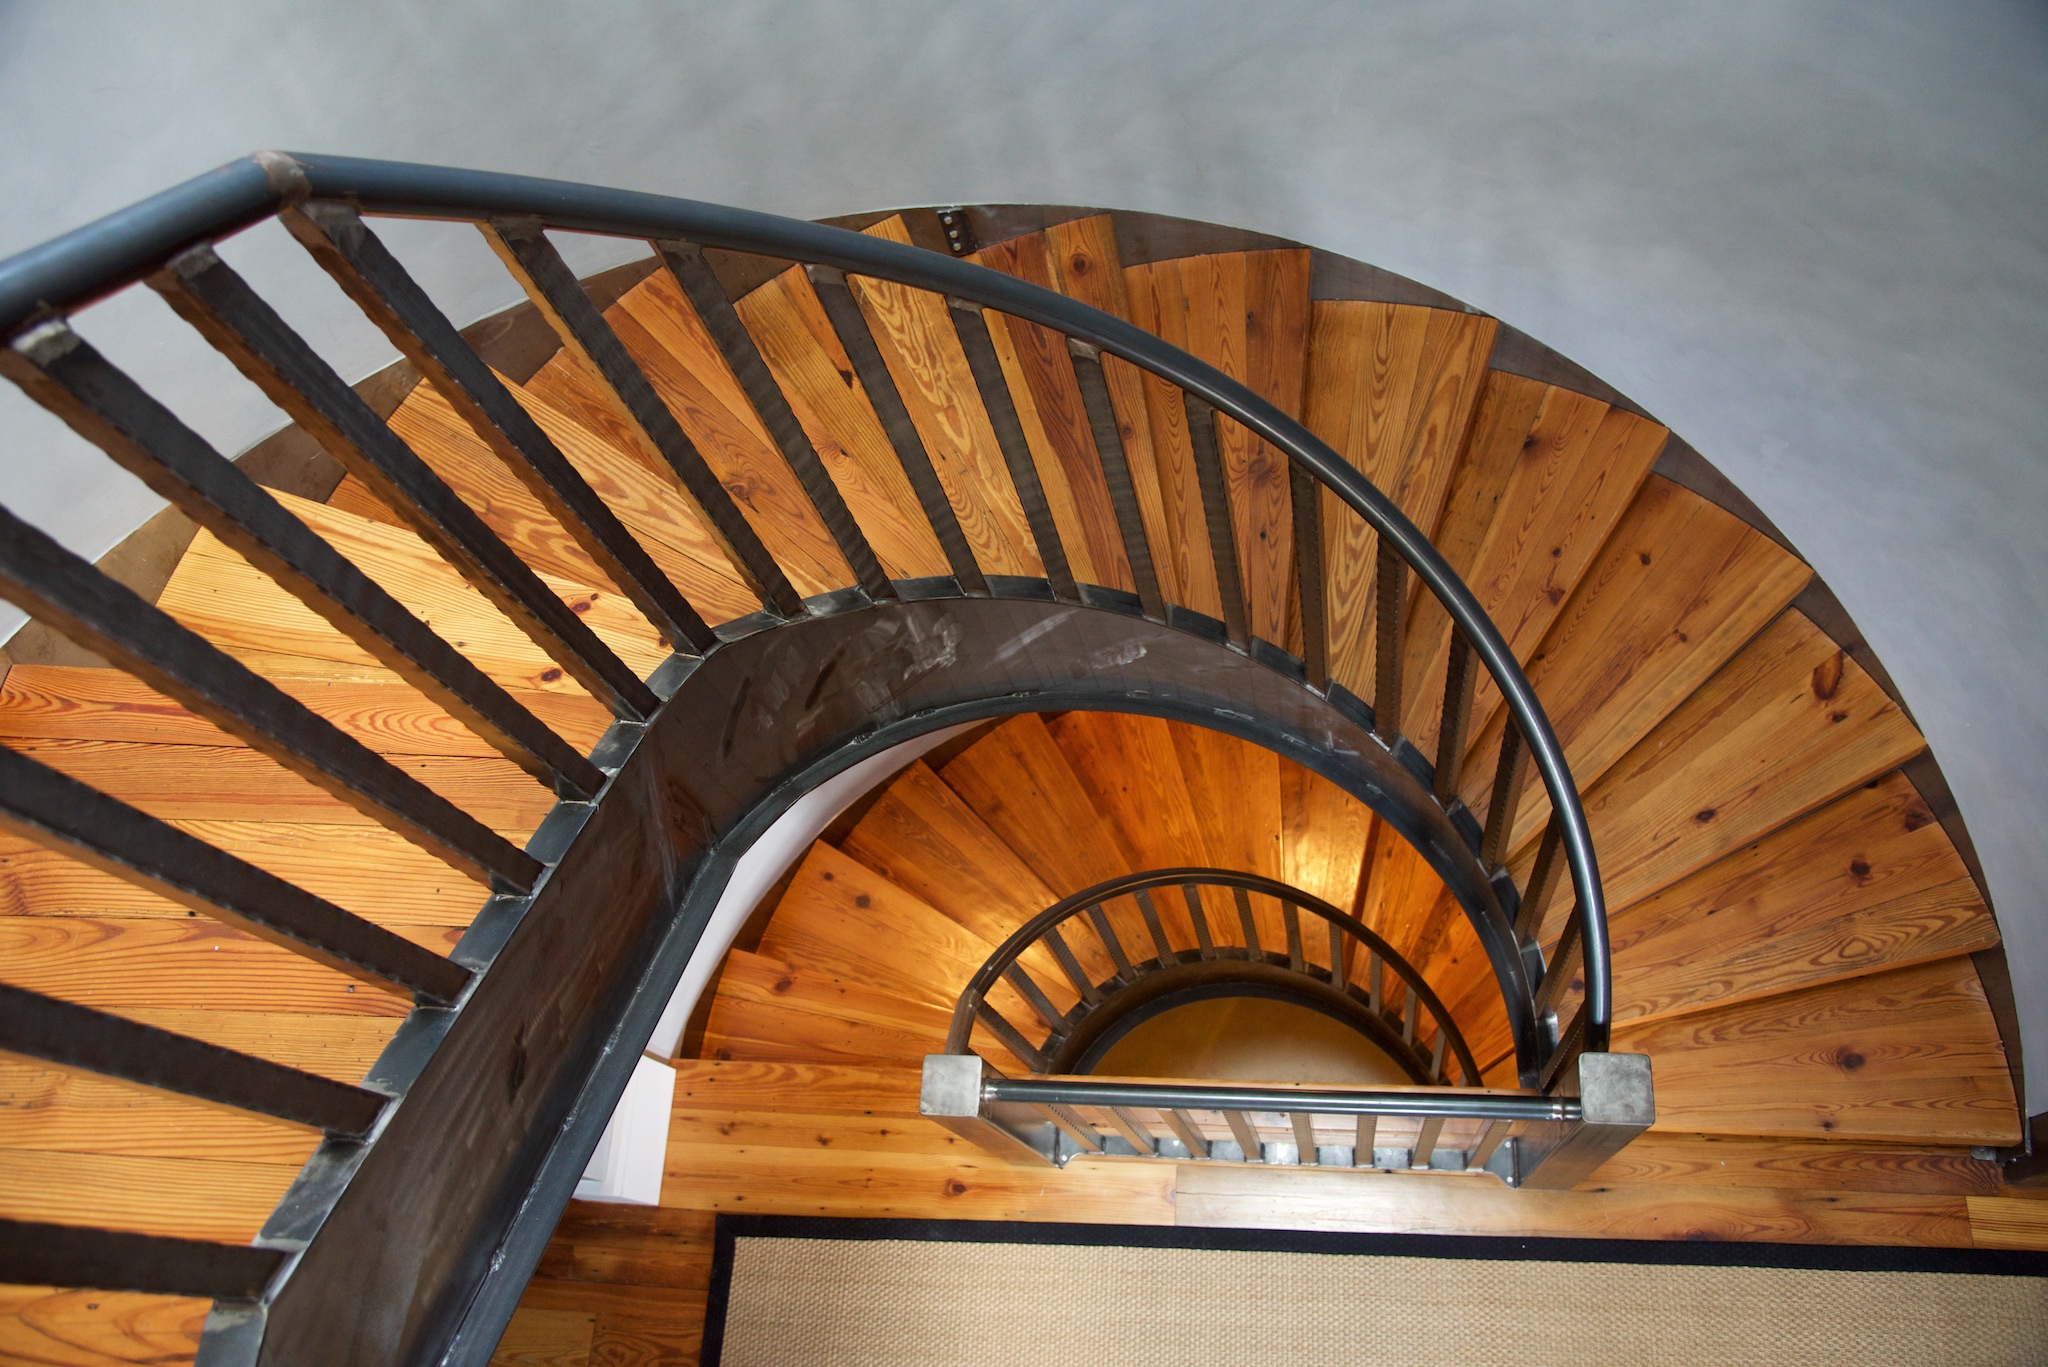 Highlighting architectural features like curved staircase